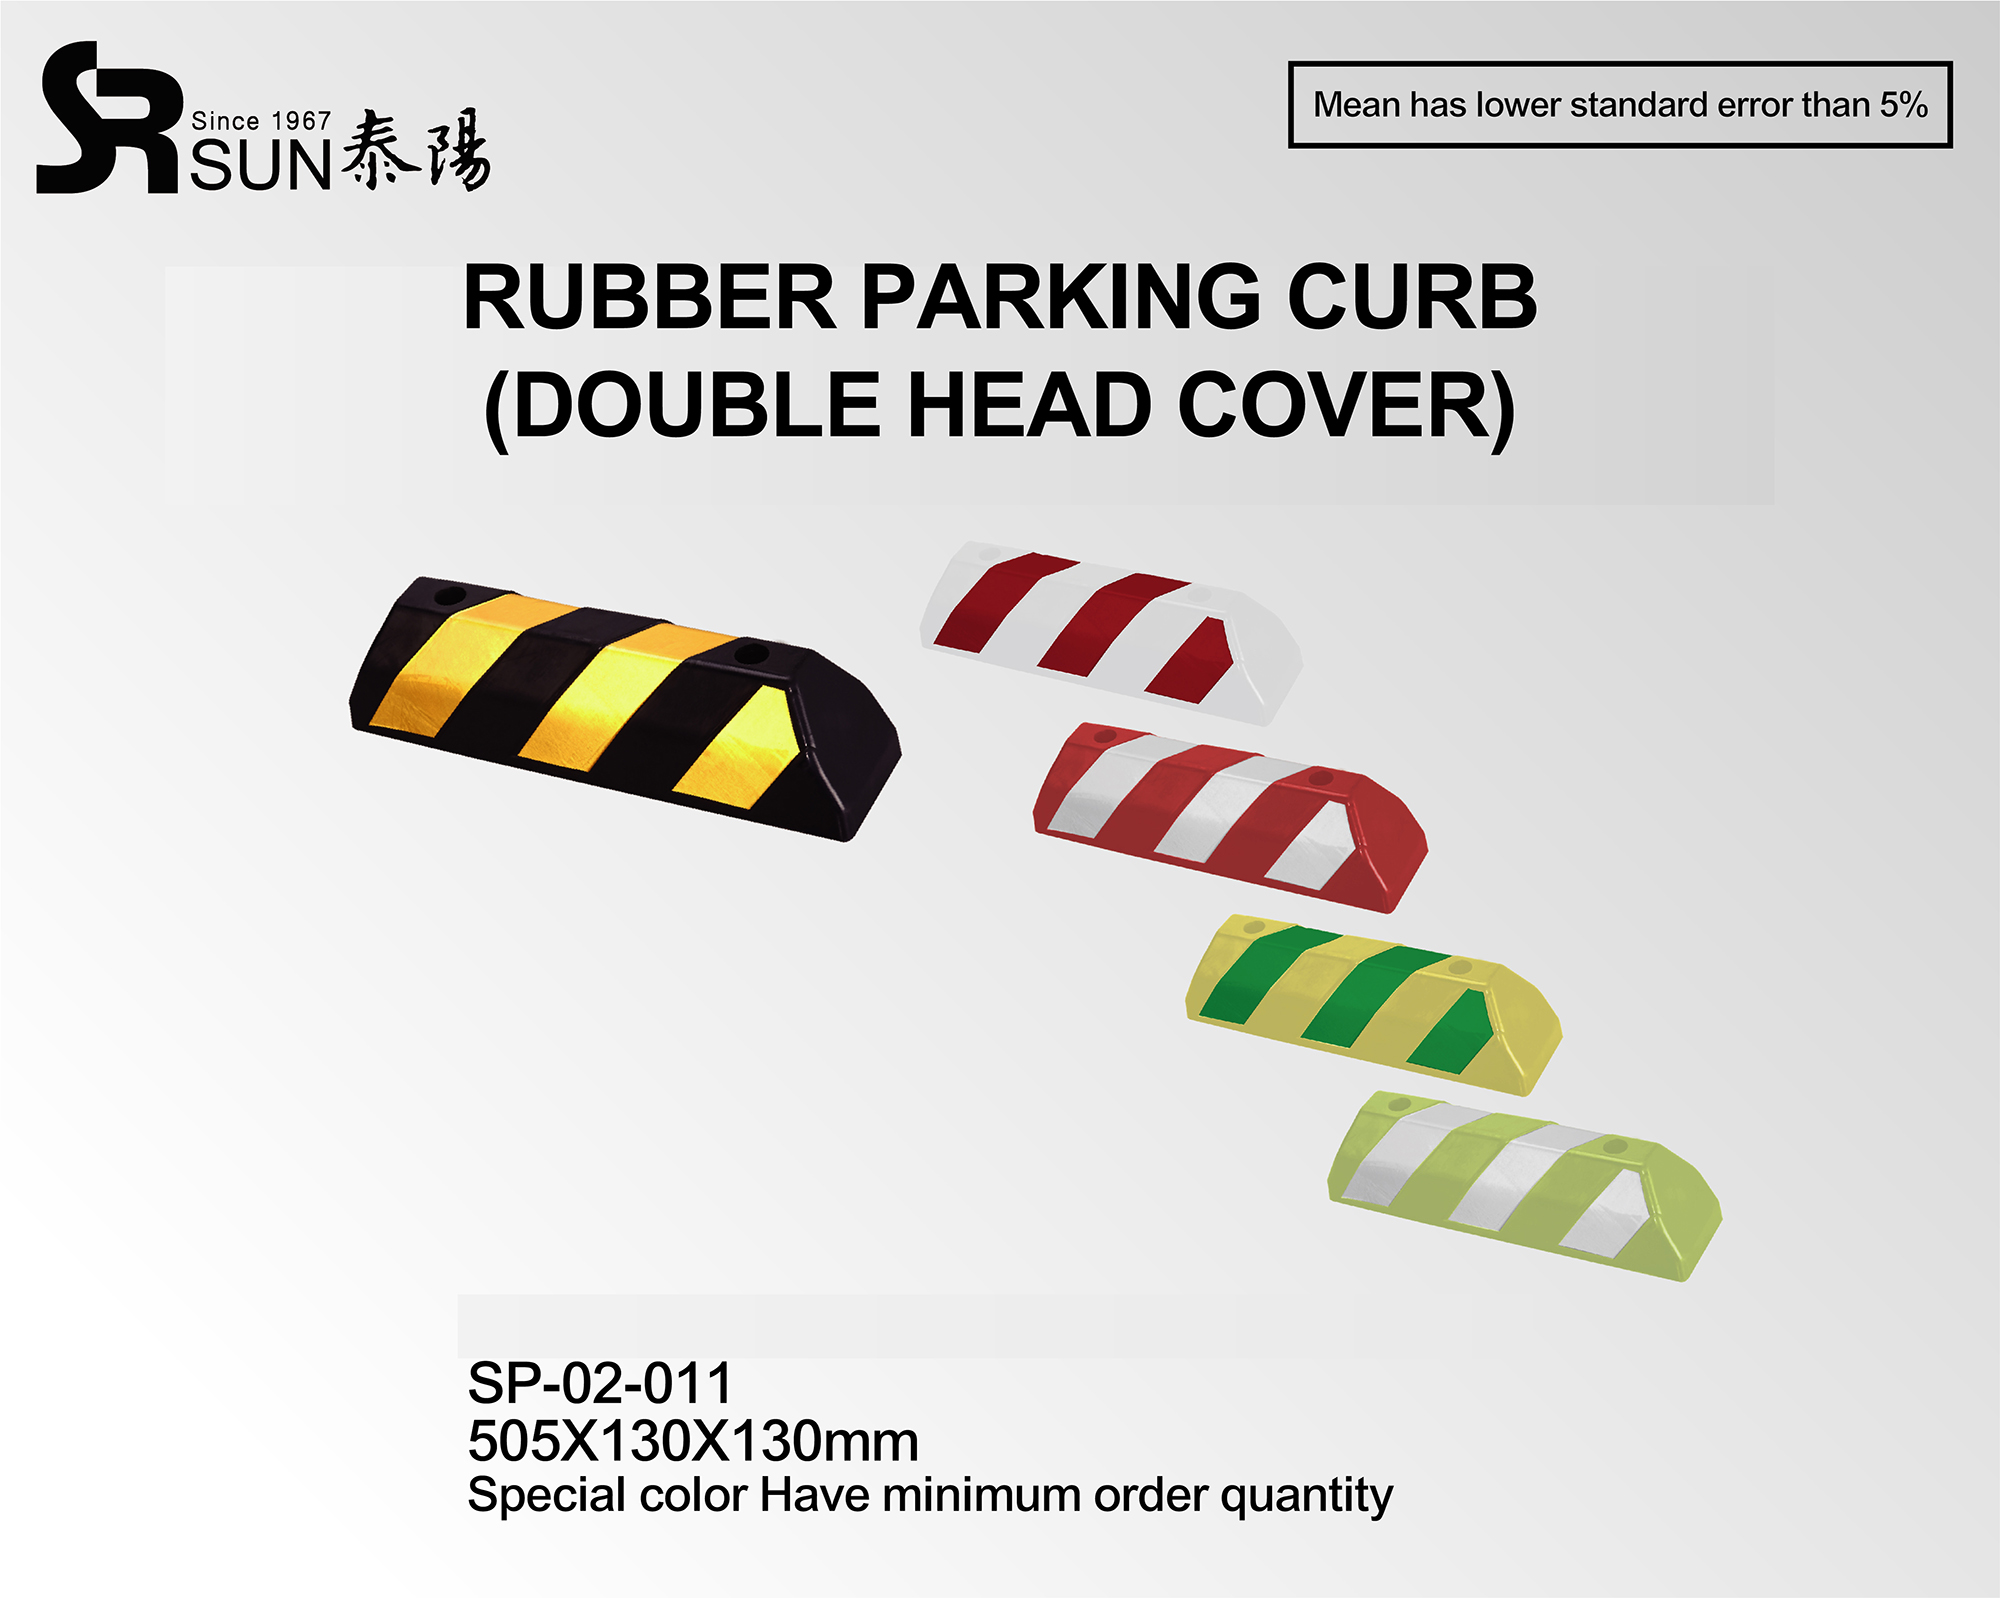 Rubber Parking Curb(Double fead cover)(SP-02-011)